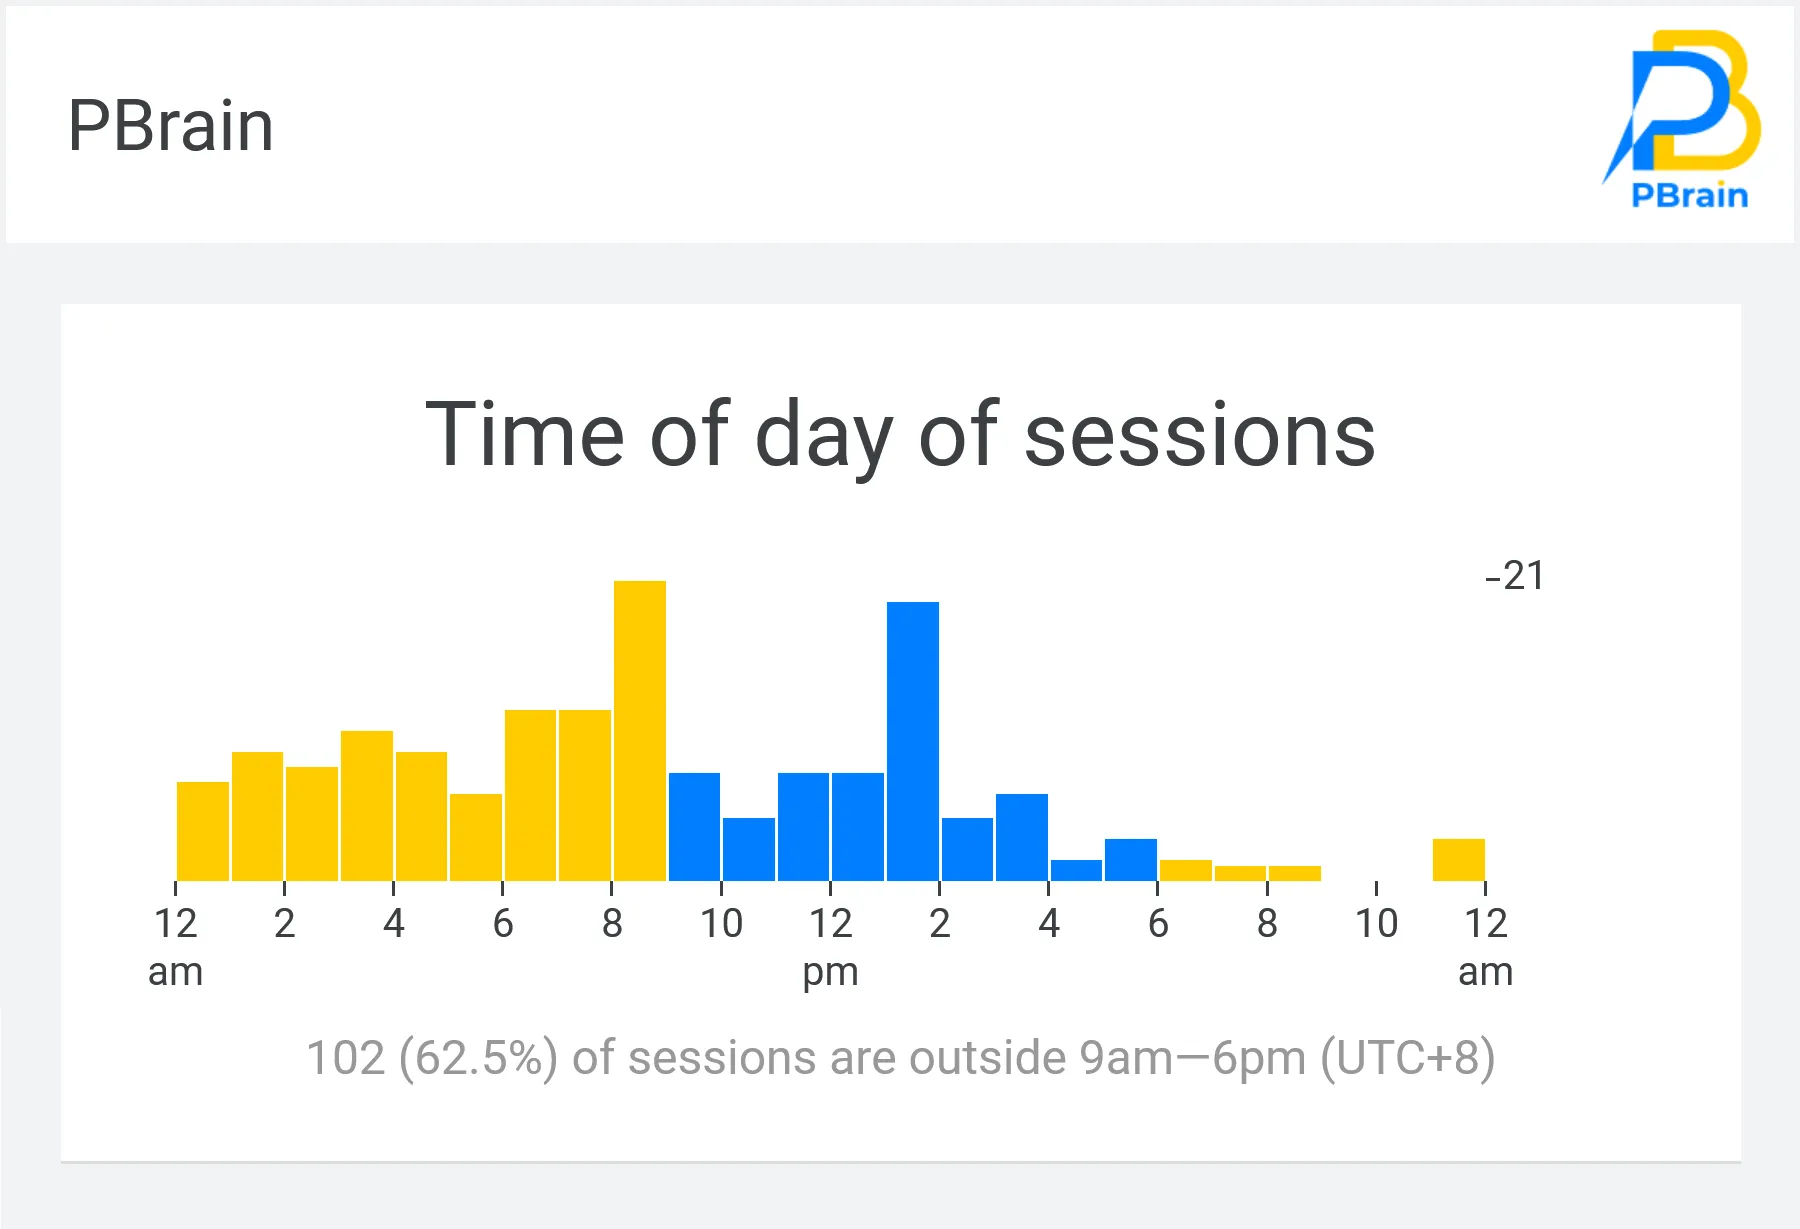 Analytics report showing time of day of sessions